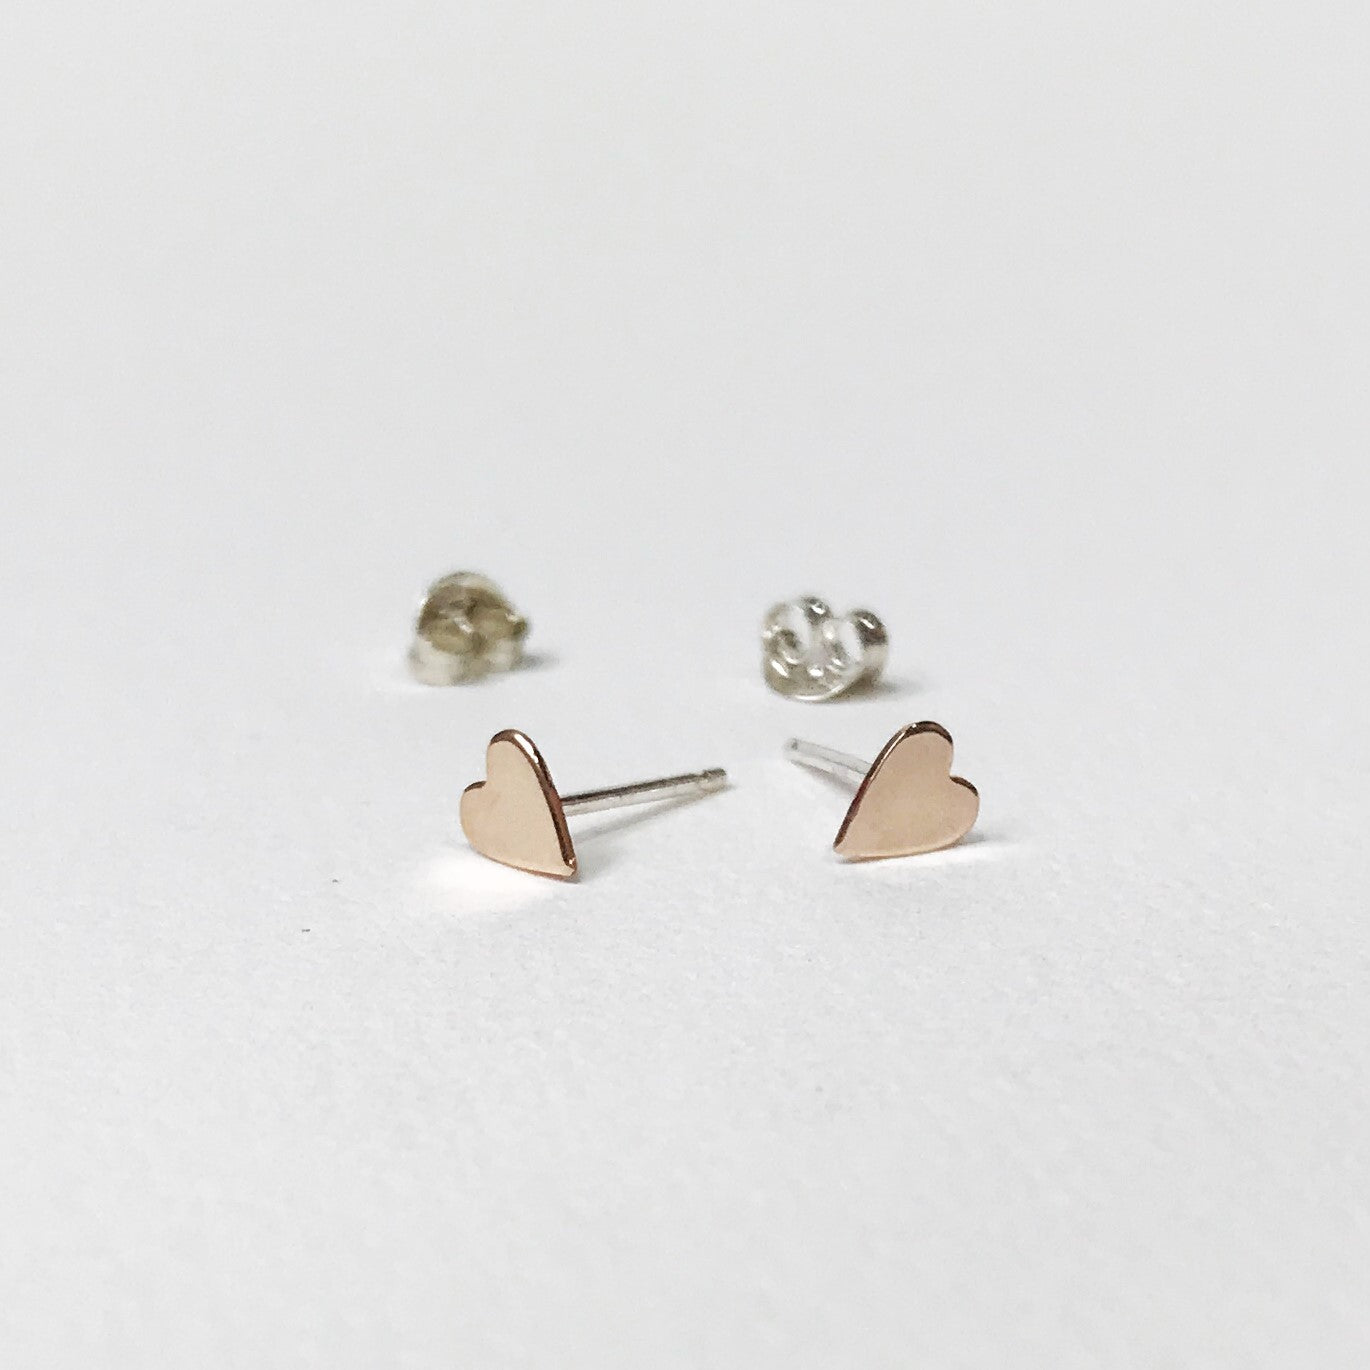 Gold filled hearts on sterling silver studs. Gold filled means sterling silver coated in a thick coating of gold.